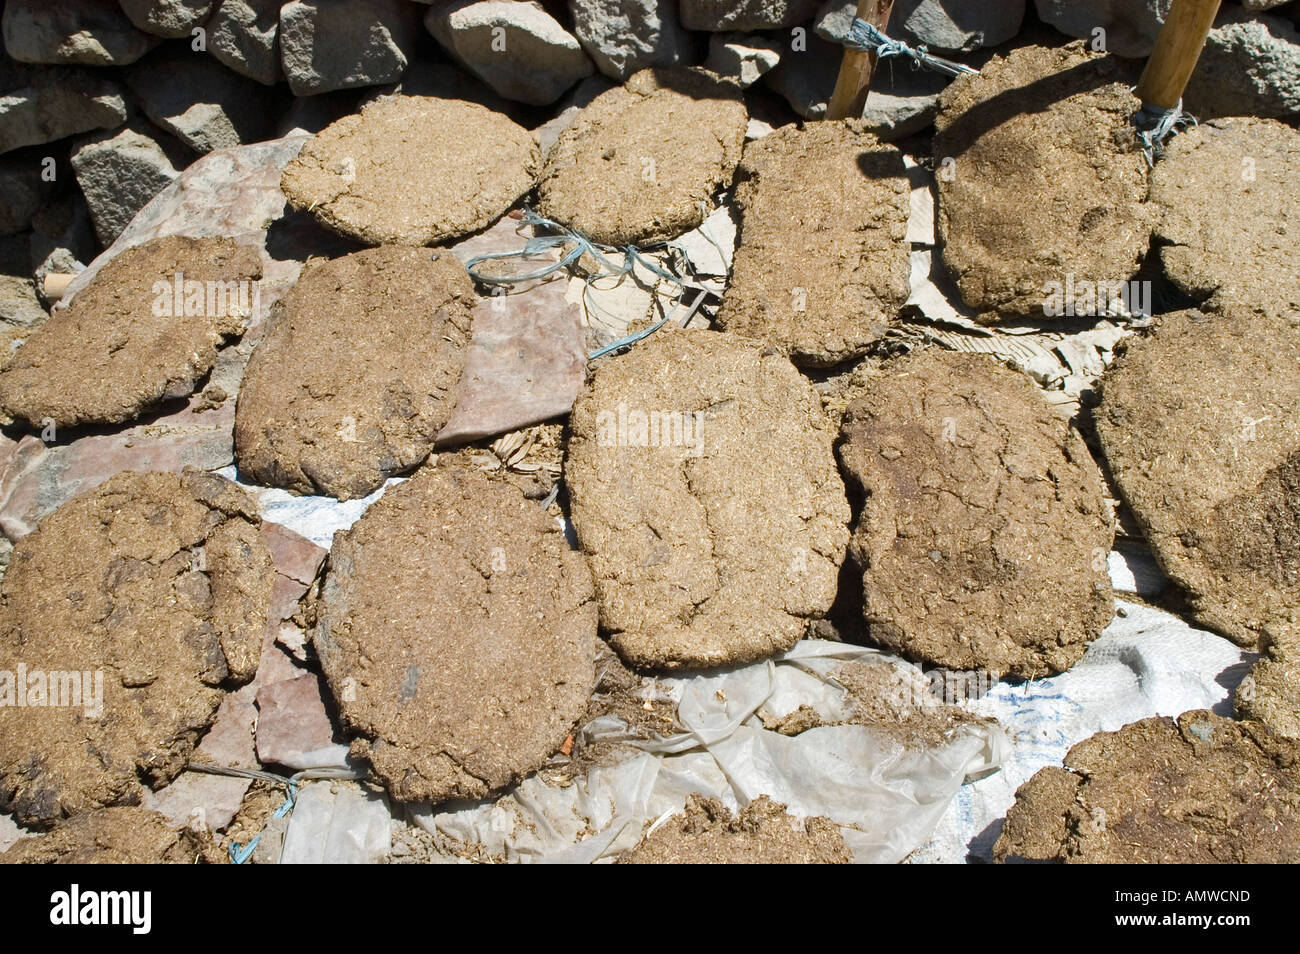 Cow chips as a natural heating material, Ladakh, Jammu and Kashmir, India Stock Photo